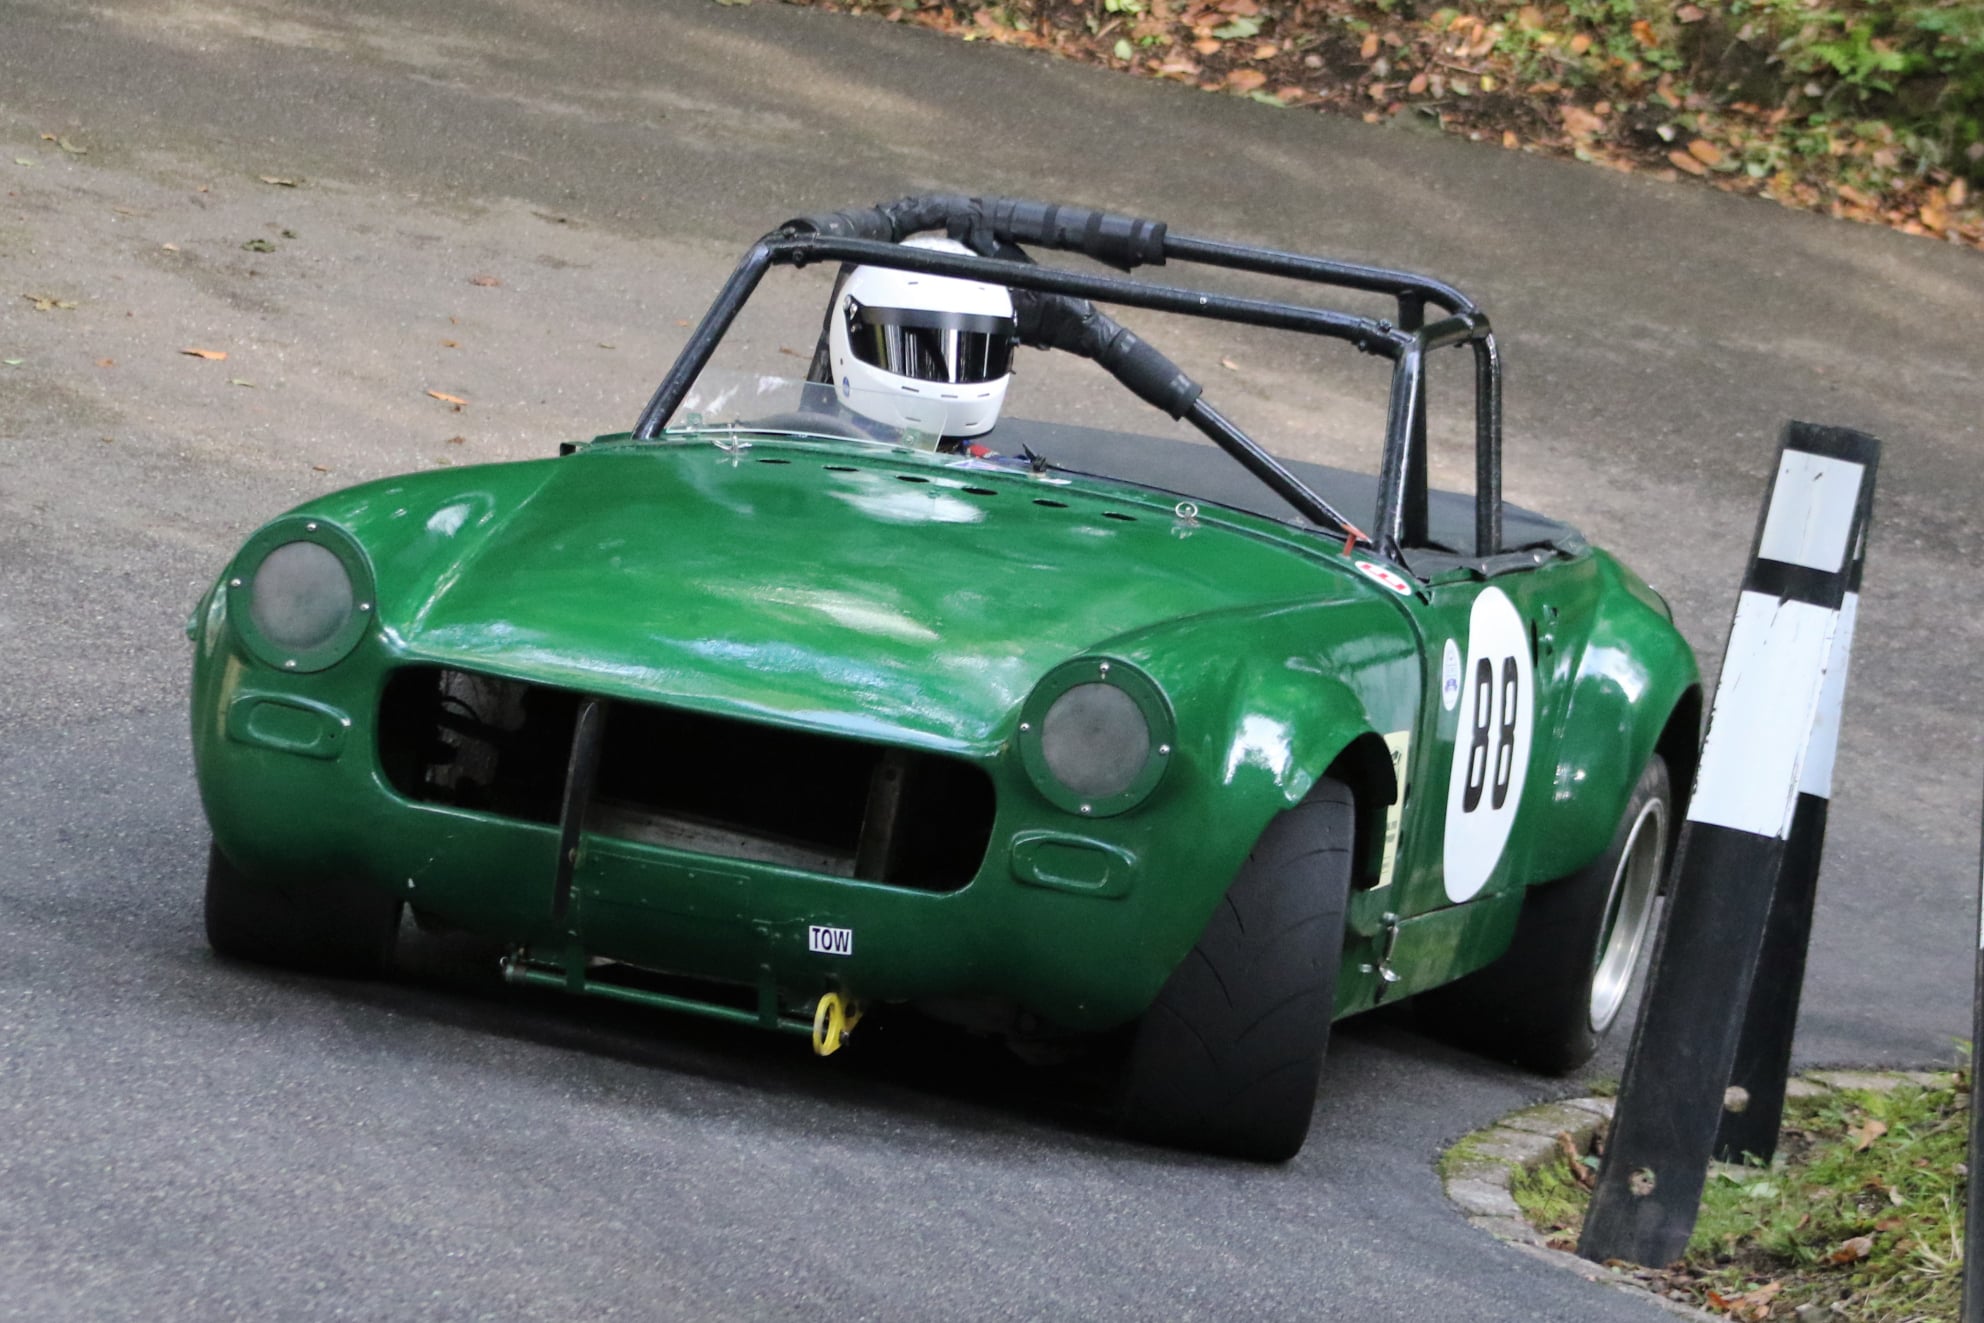 Read more about the article Dedicated parking and discounted spectator entry for Wiscombe Park Hillclimb